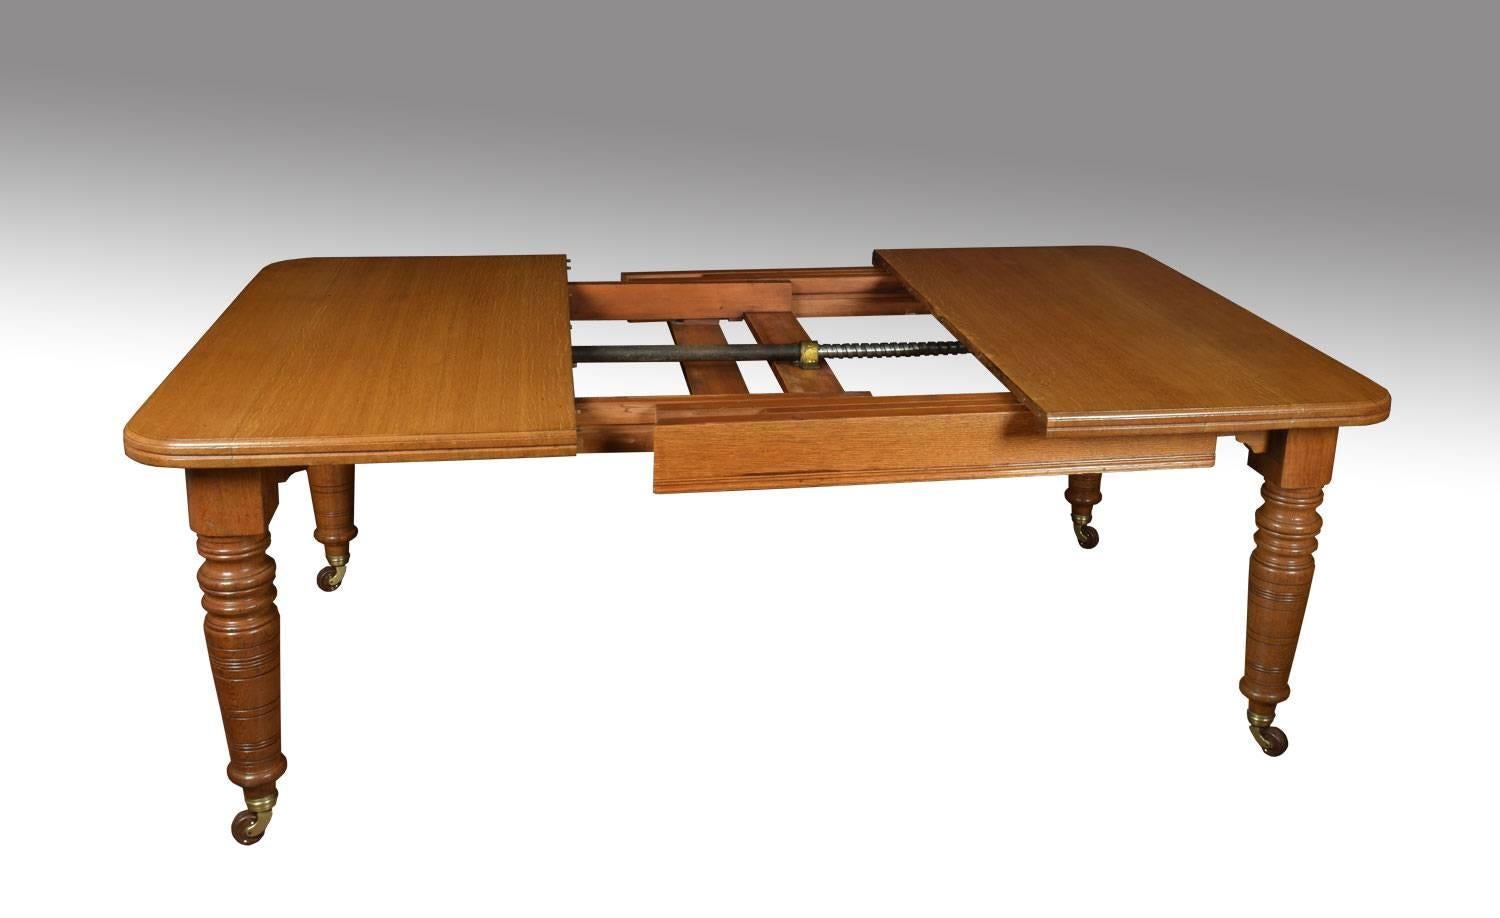 19th century oak dining table, the rectangular top with rounded corners and moulded edge, the telescopic action opening to incorporate three leaves, on turned tapering legs with ceramic casters (will seat 10-12 people)
Dimensions:
Height 28.5